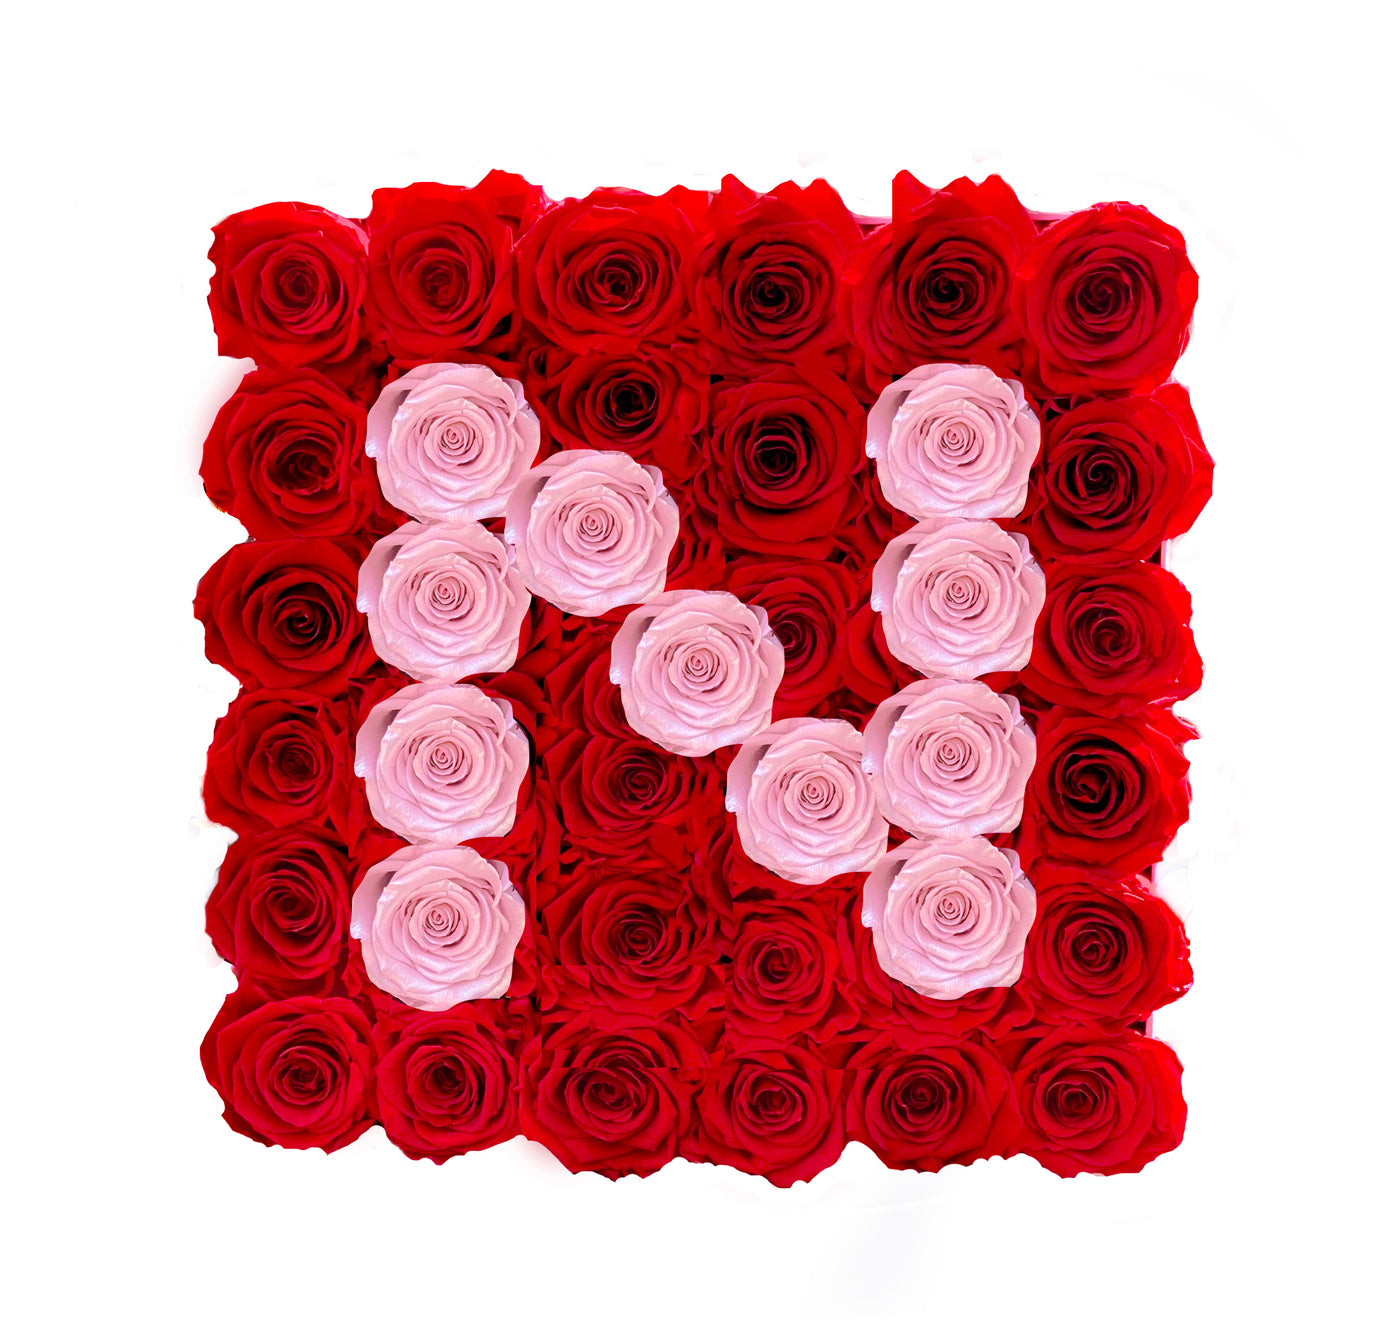 Large Square White Initial Box with Red Flame & Pink Blush Roses